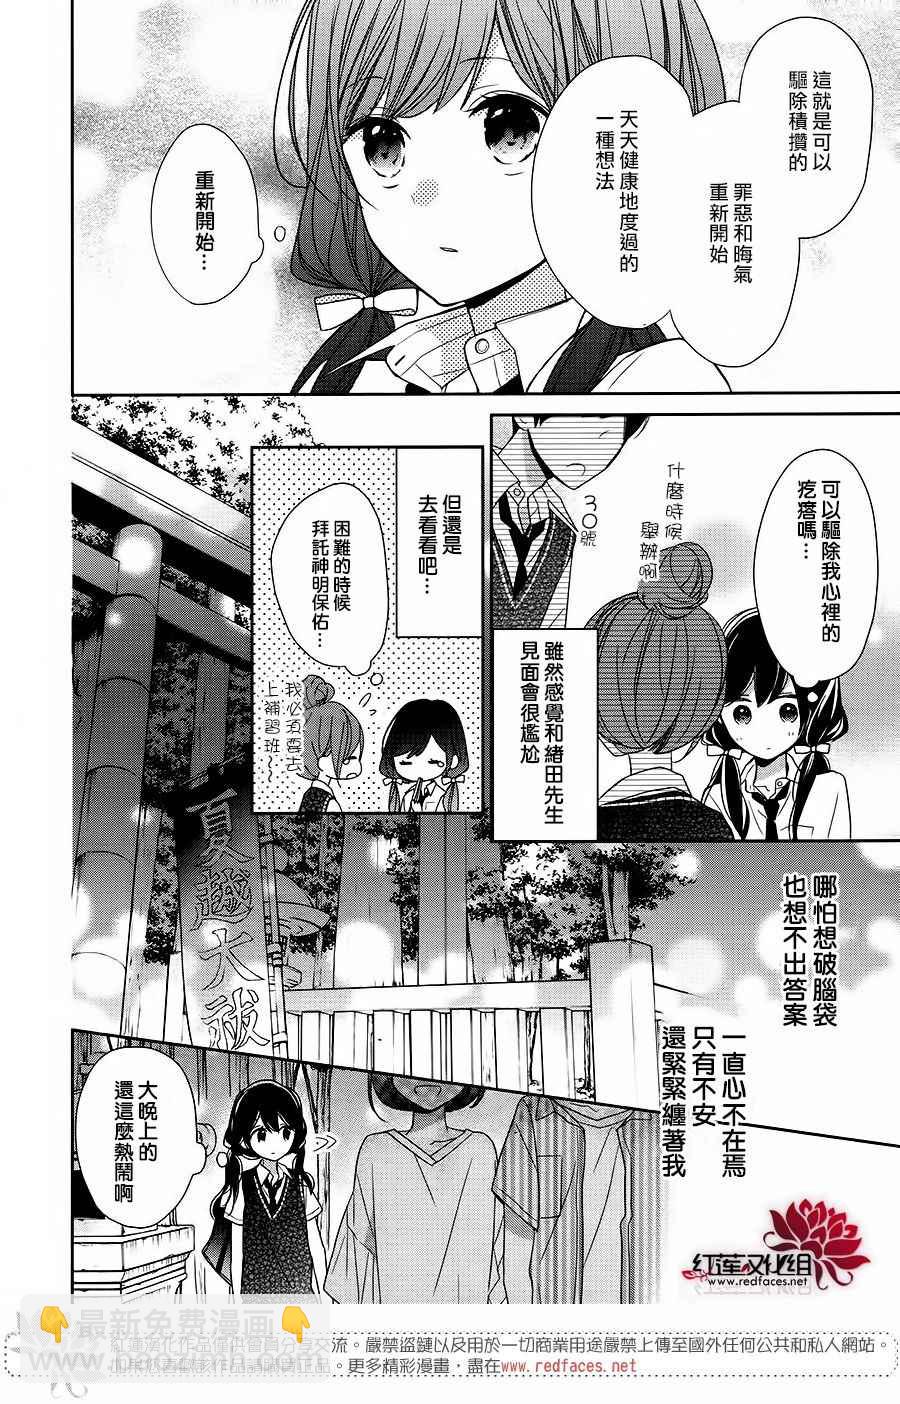 If given a second chance - 10話 - 5